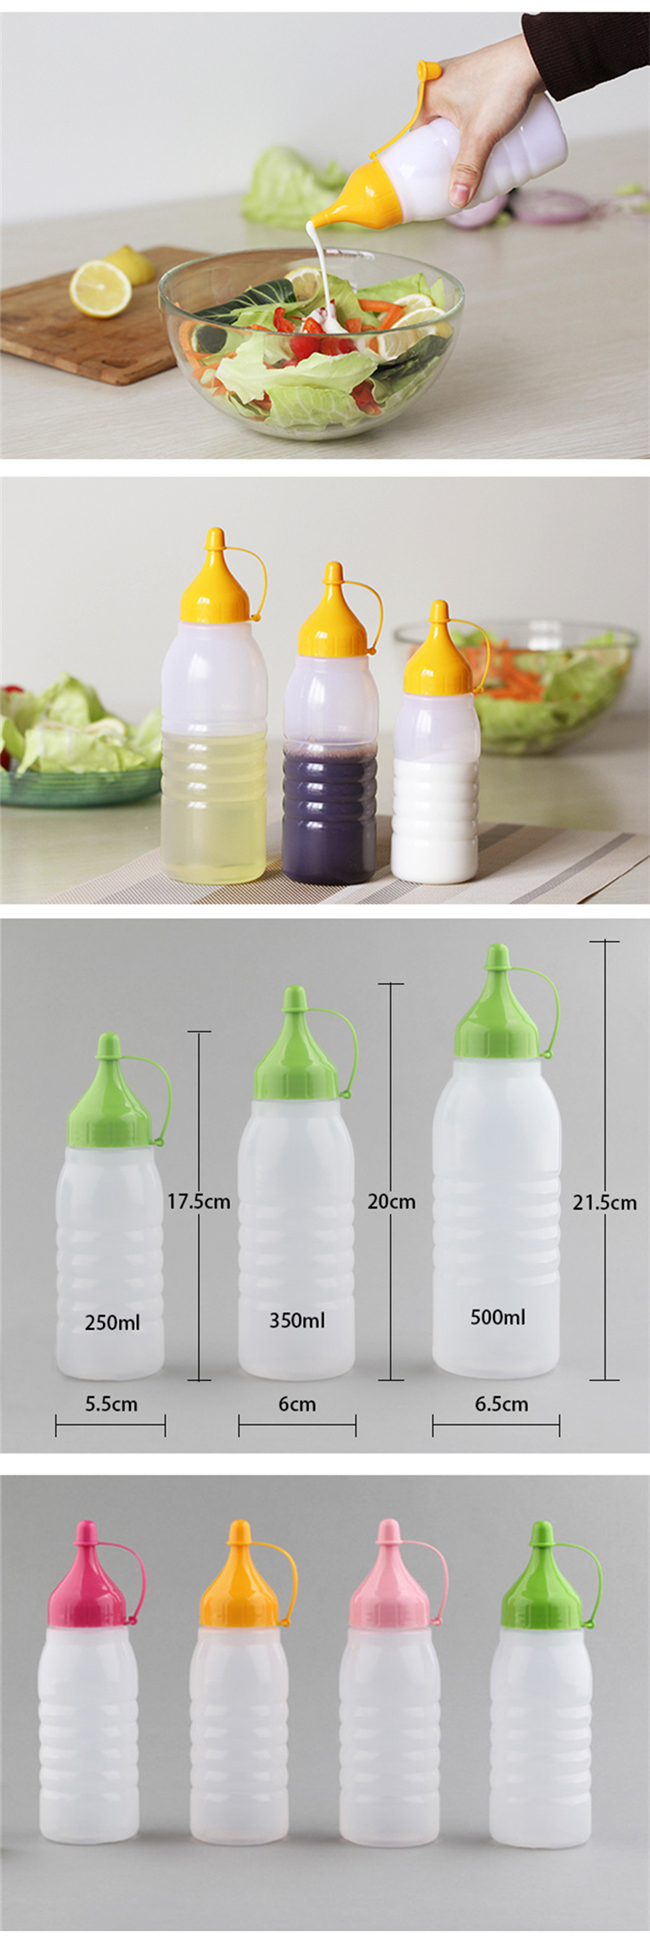 Dispener Oil Bottle with scale